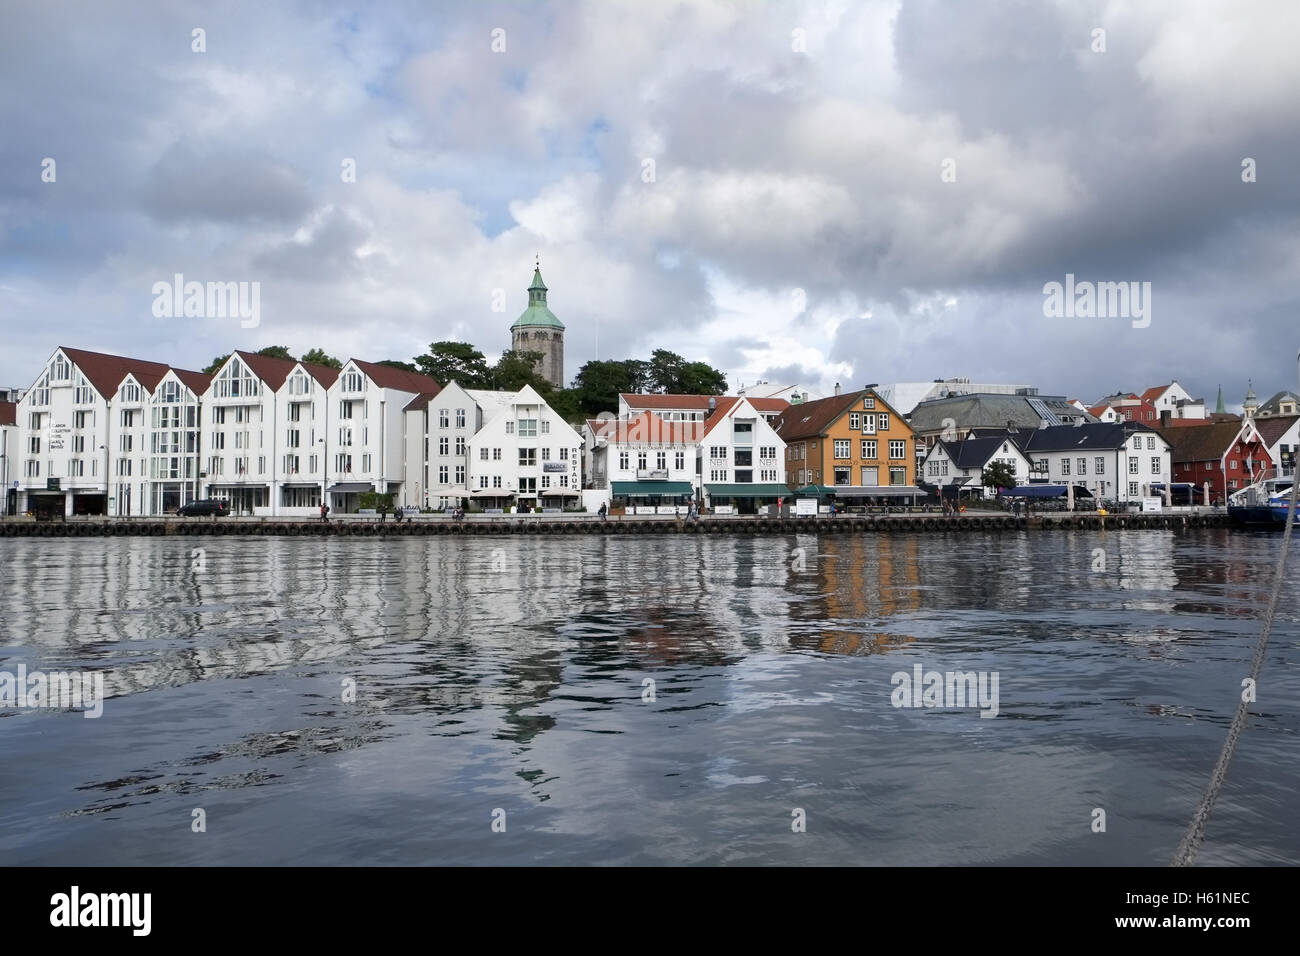 Stavanger, Norway - July 2016: A panoramic view of a hotel, bars and restaurants overlooking the harbour Stock Photo